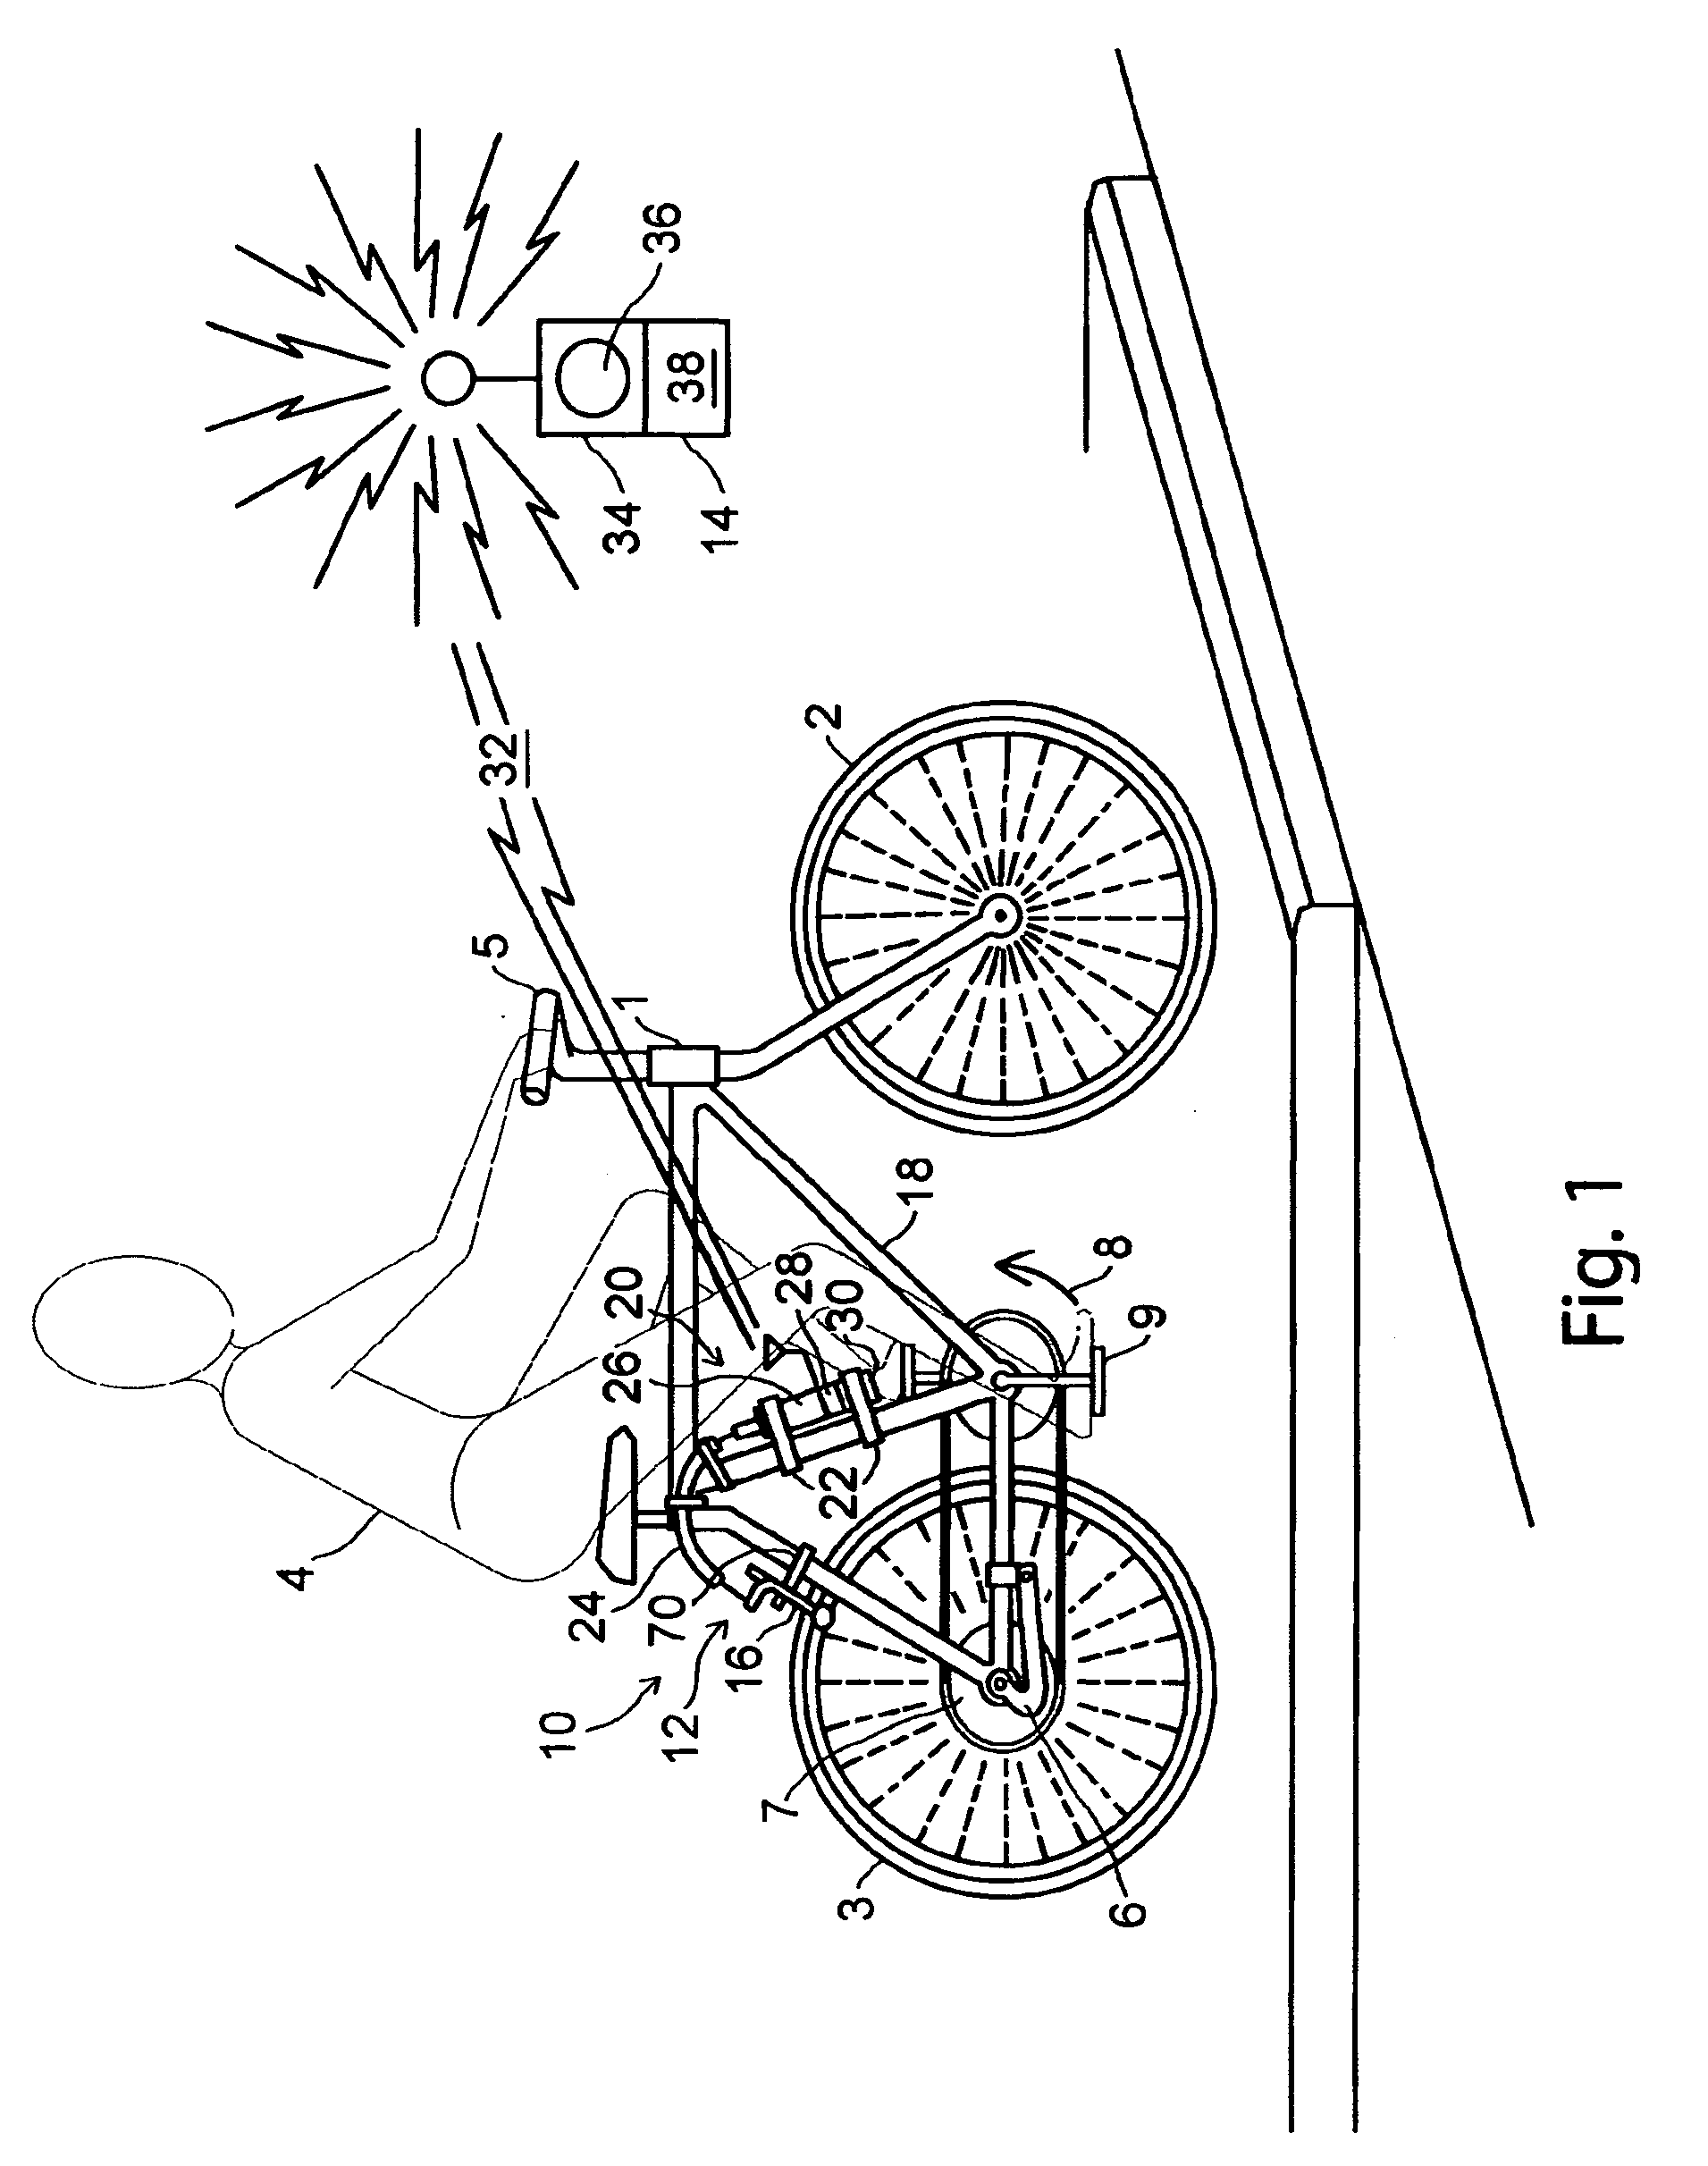 Bicycle safety apparatus